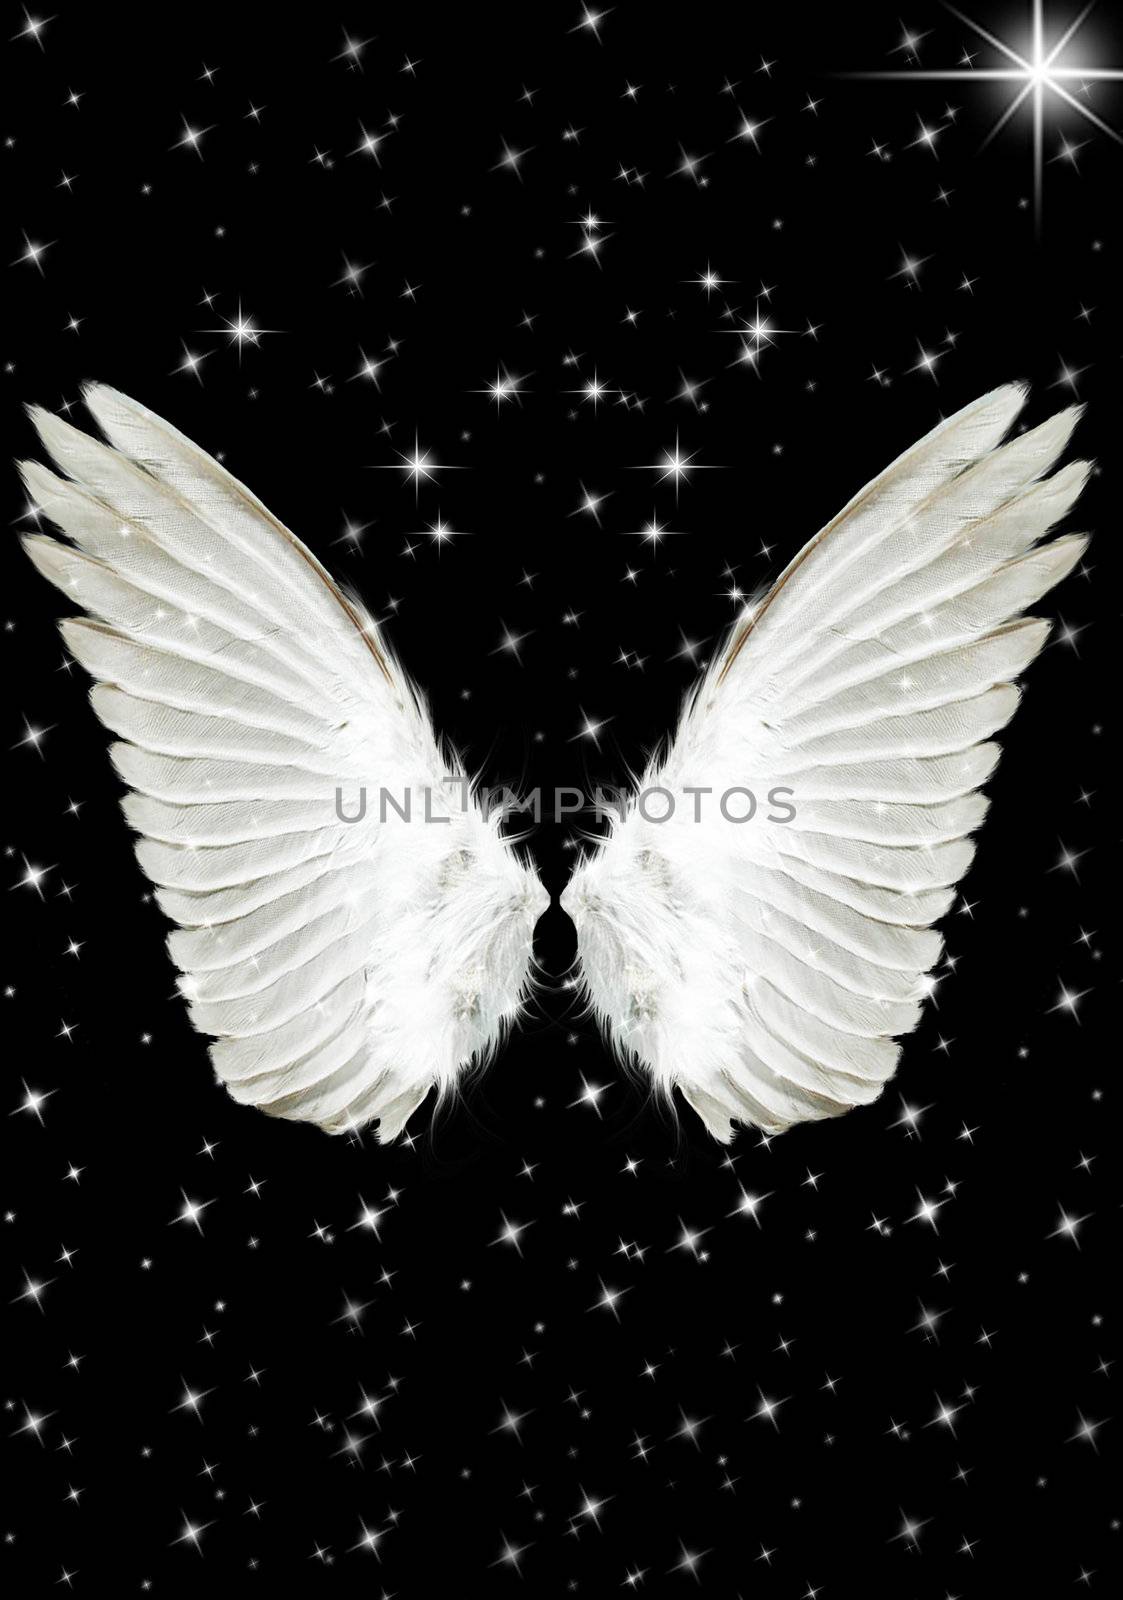 Nice big white angels wings in the night